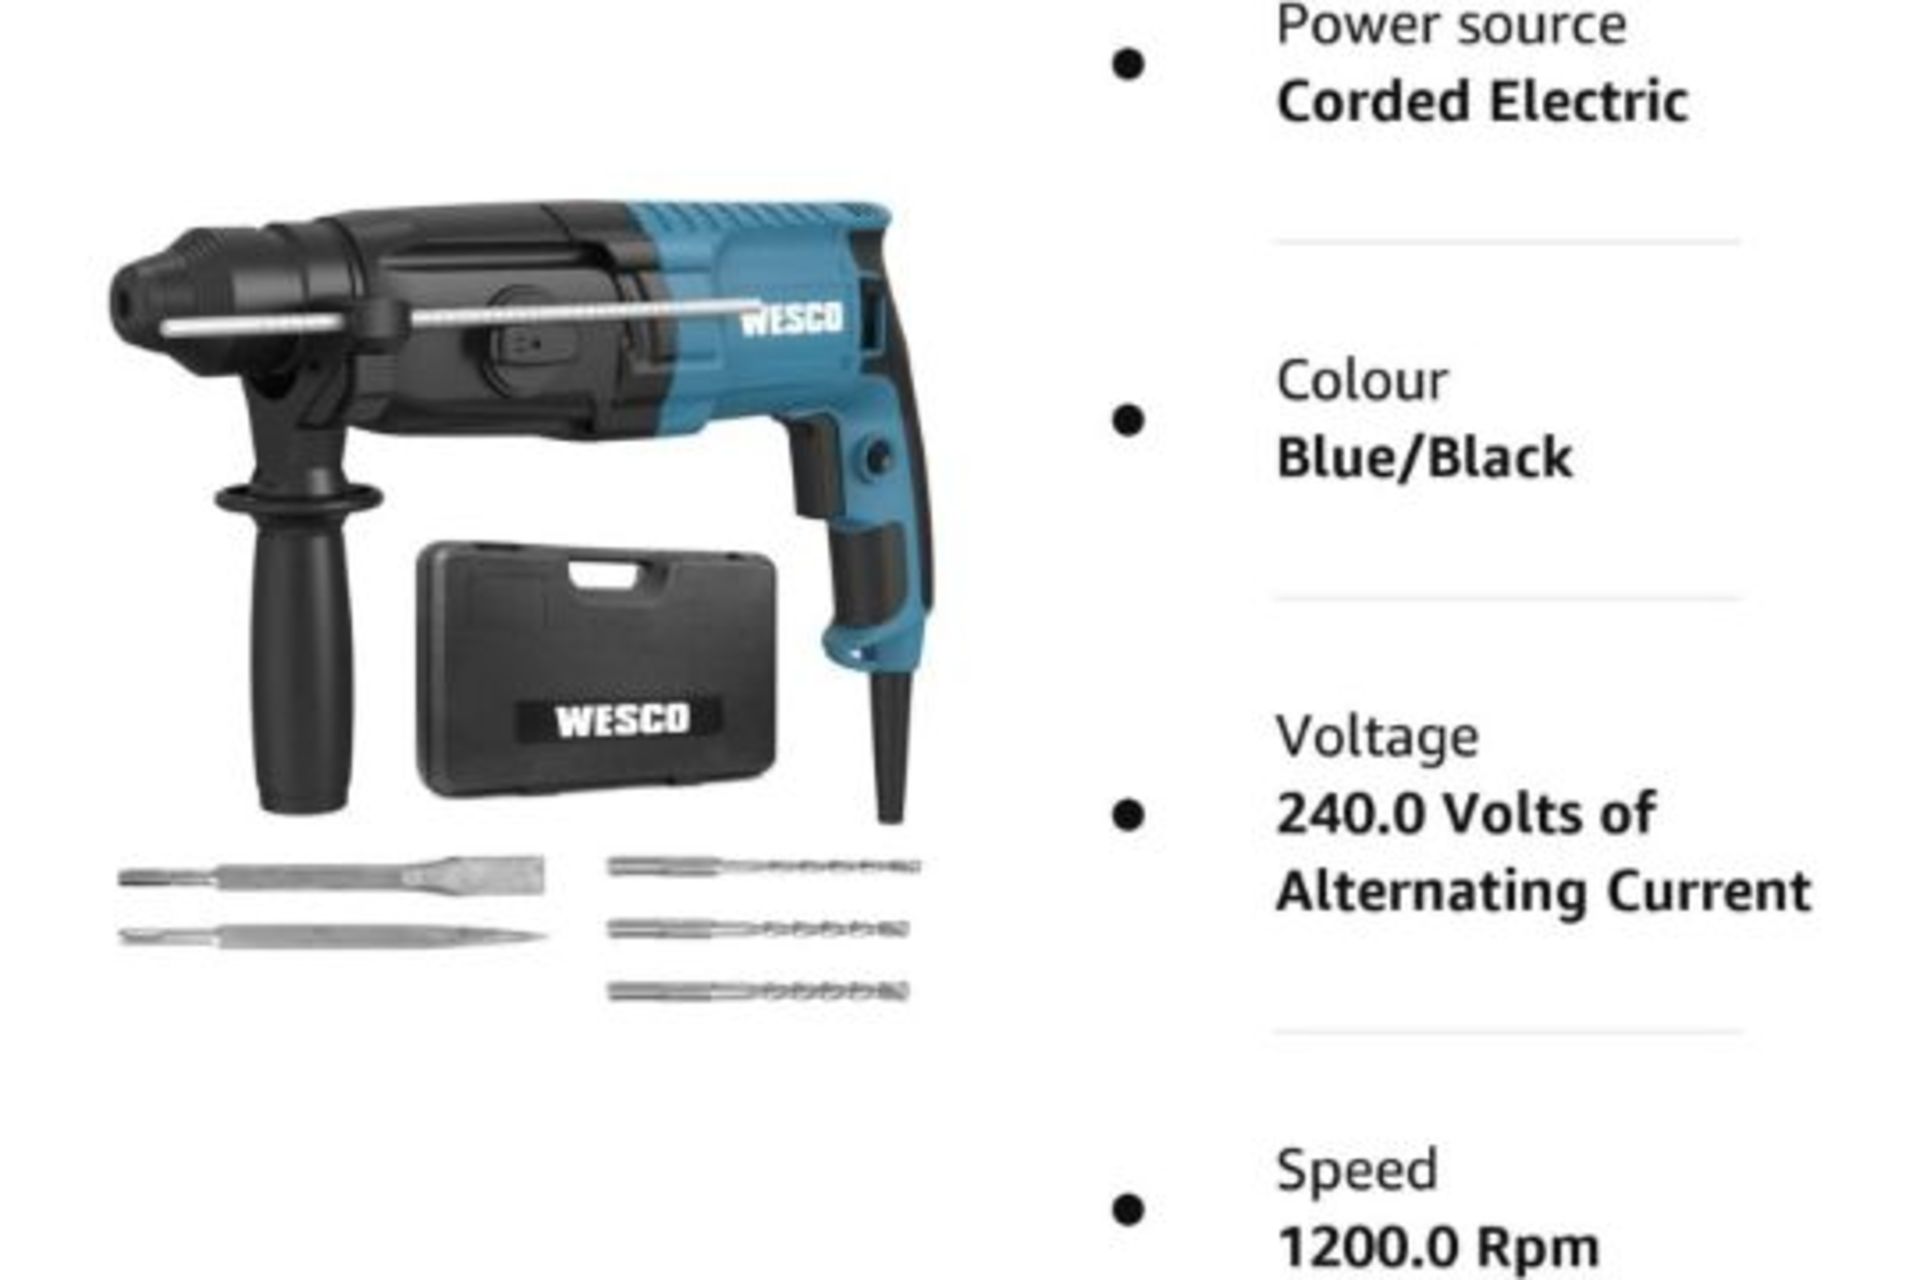 TRADE LOT 4 x NEW BOXED WESCO 800W SDS Plus Rotary Hammer Drill, 3 Modes in 1, 2.8J Impact Energy, - Image 3 of 3